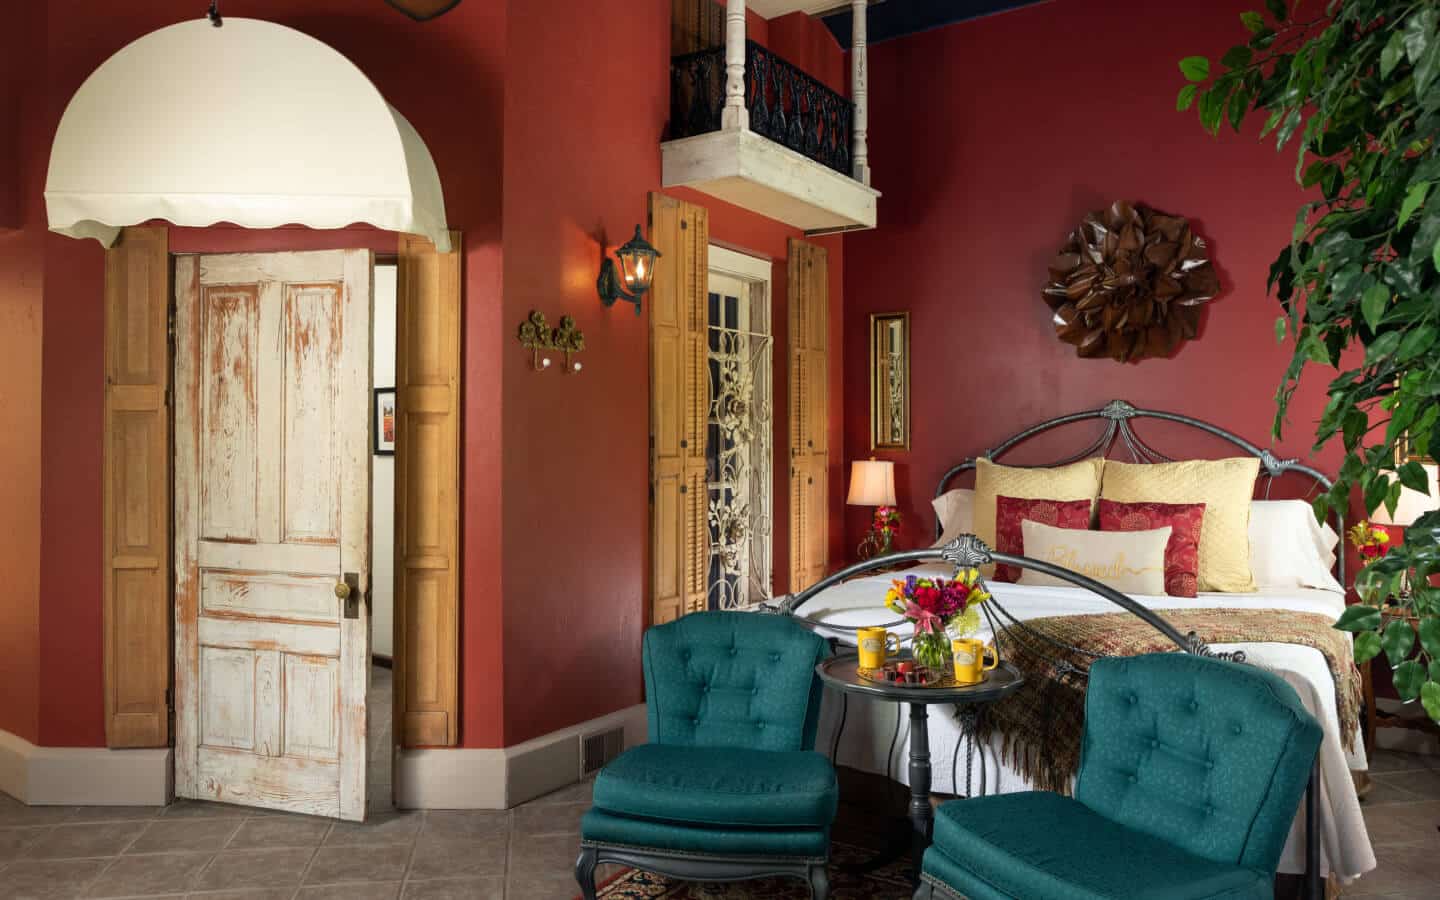 Romeo & Juliet Suite with deep muted red walls and a king-size bed